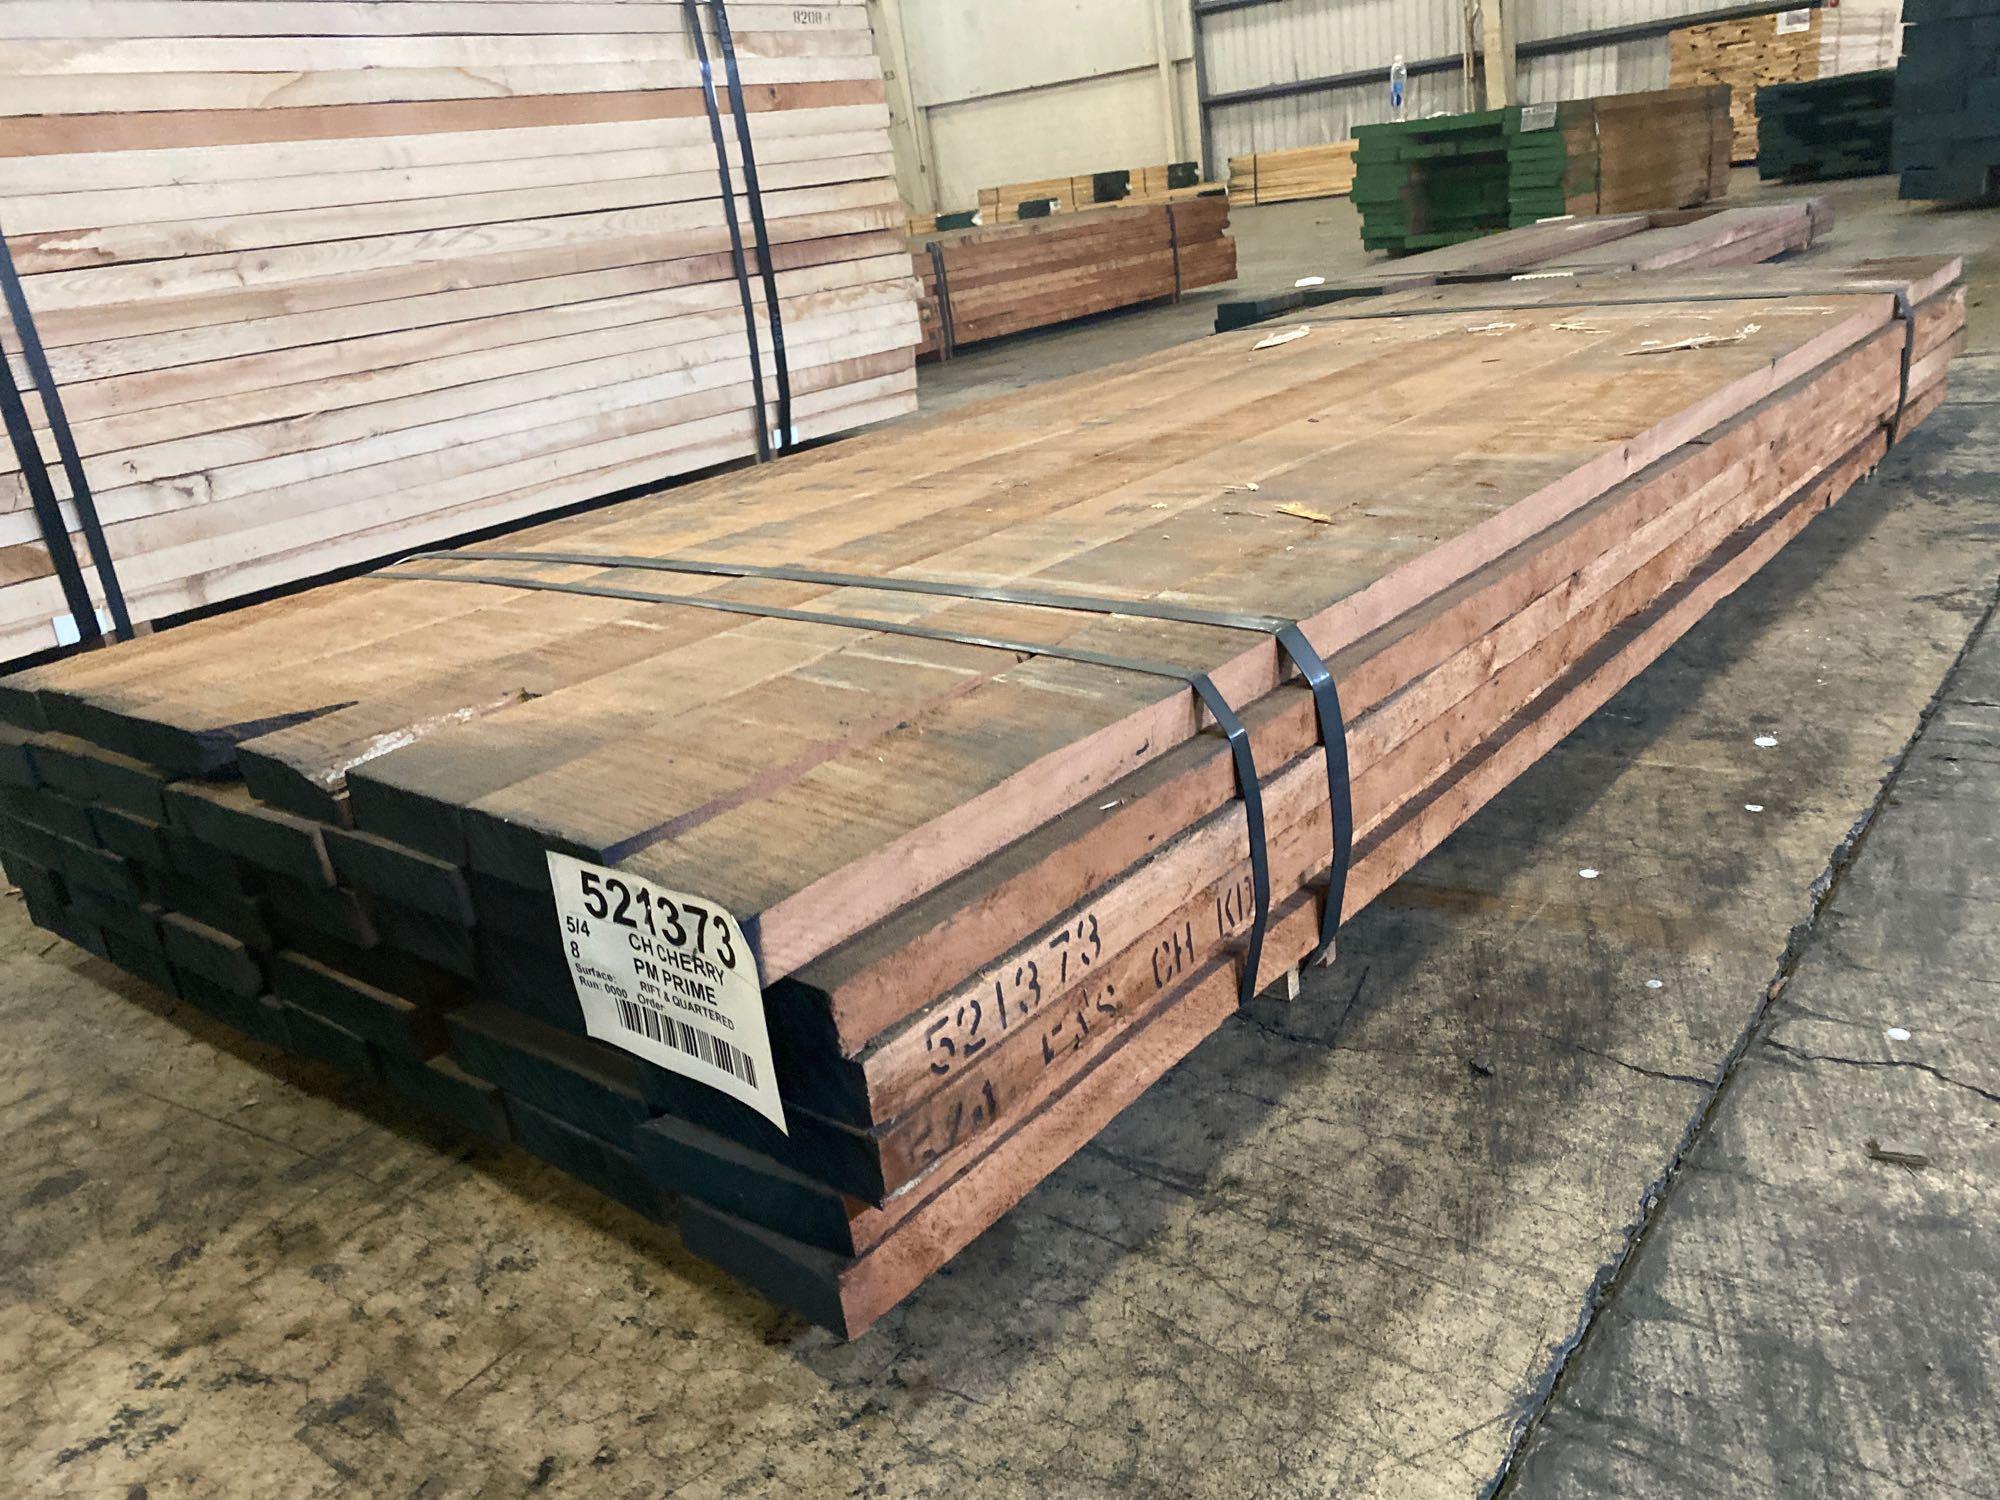 Approx 48 pcs of Prime Cherry Lumber, 5/4 thick